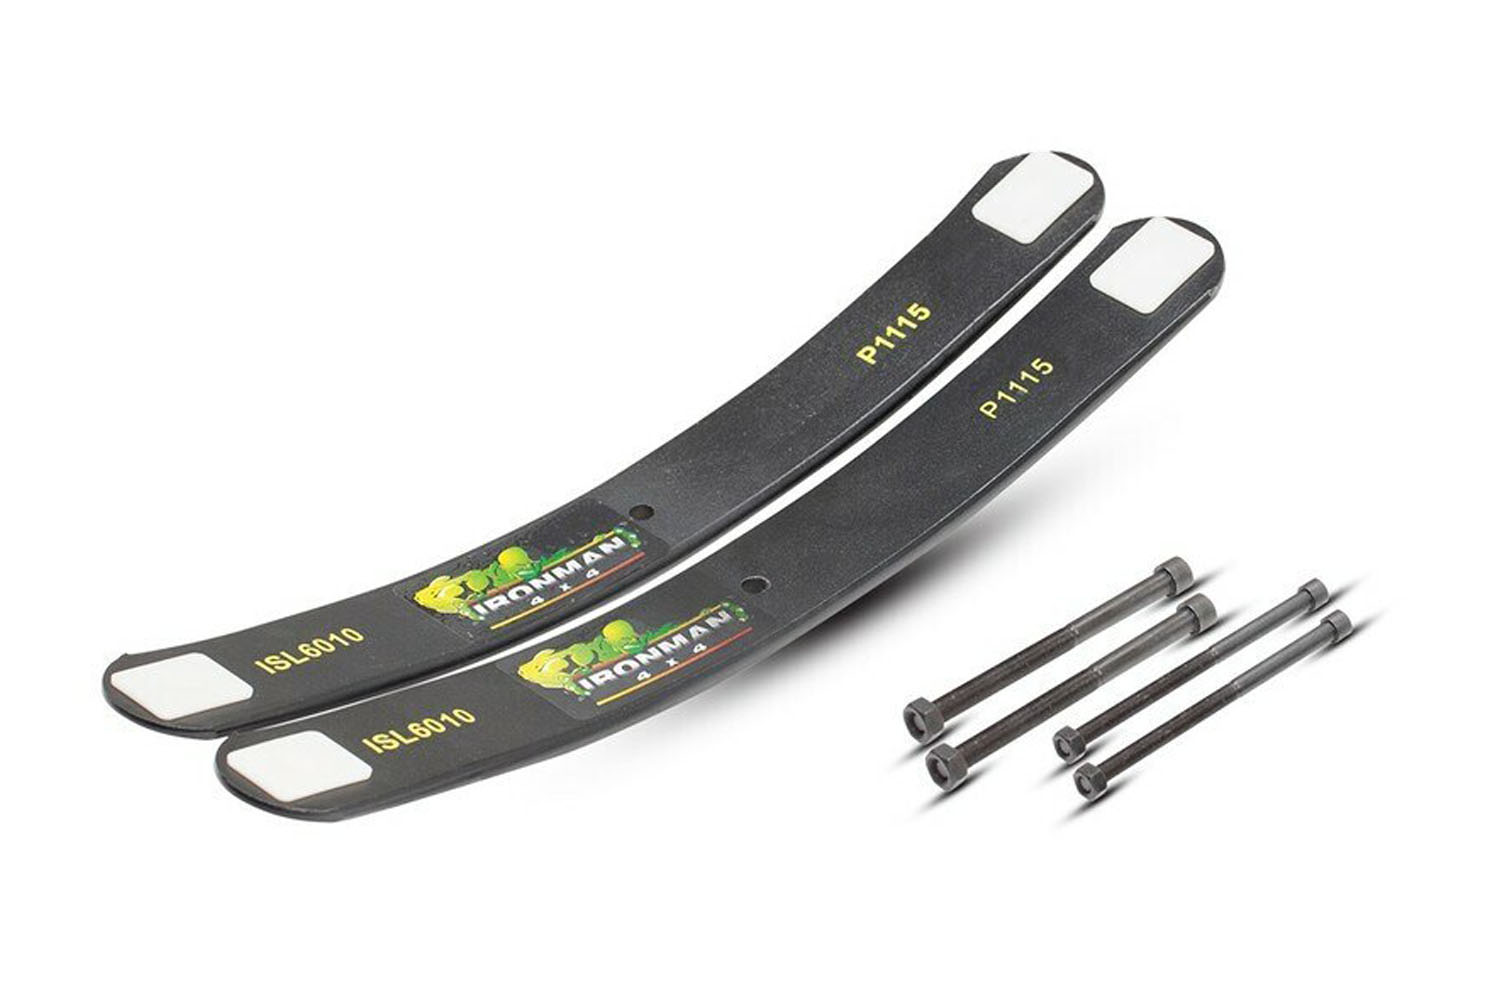 Add-A-Leaf Kit: Universal Tapered Leafs to Upgrade Existing Leaf Springs Questions & Answers